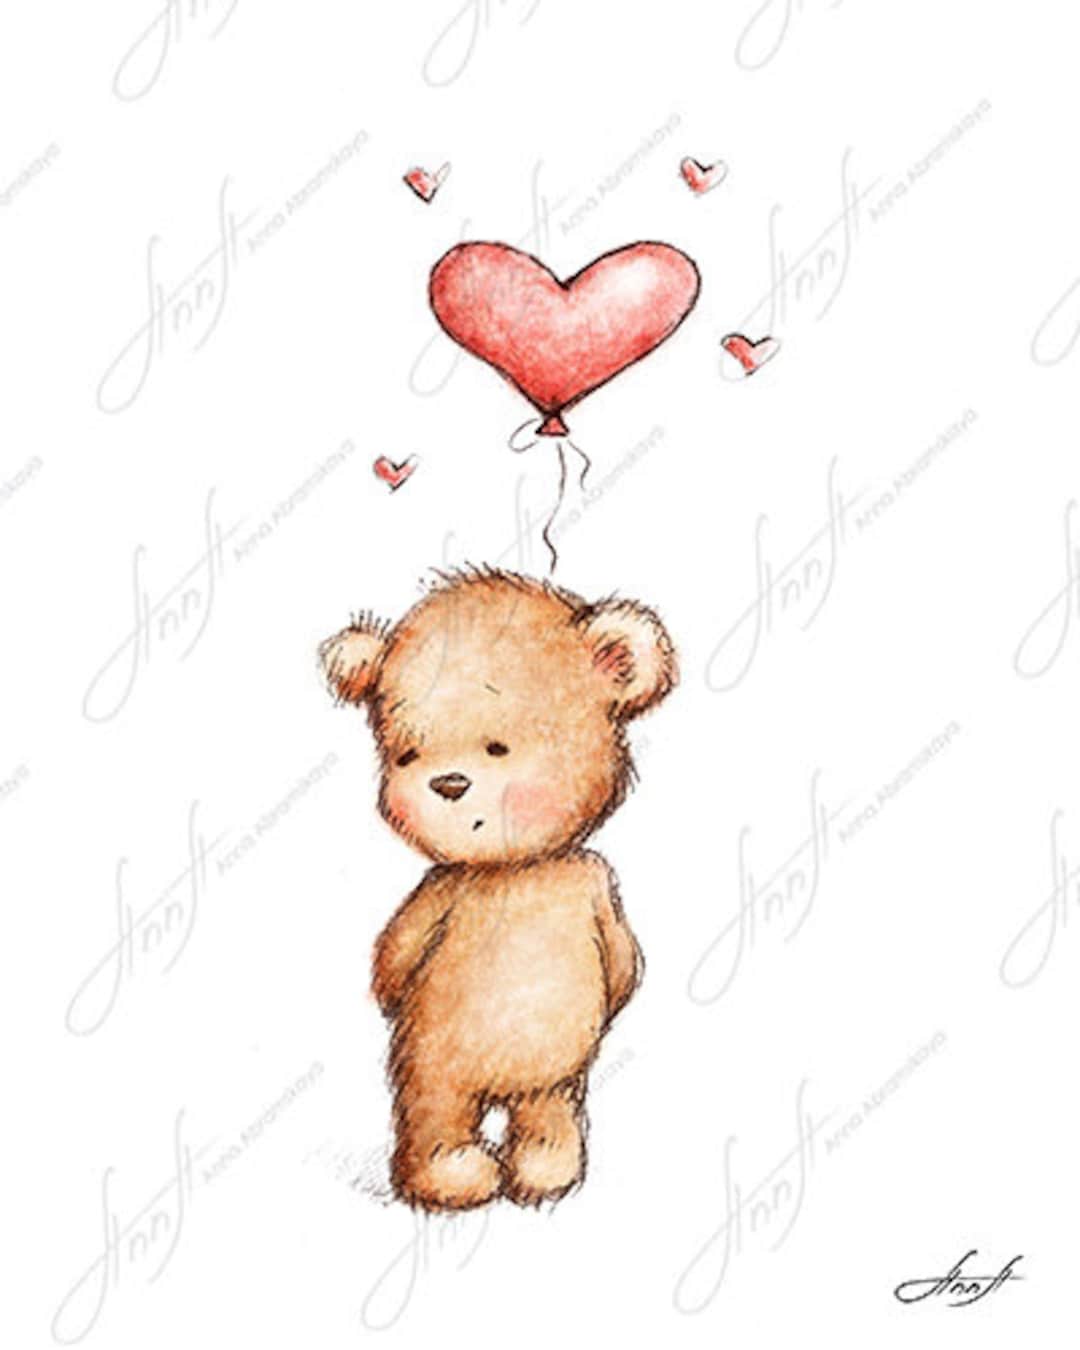 Buy The Drawing of Cute Teddy Bear With the Red Heart Balloon ...